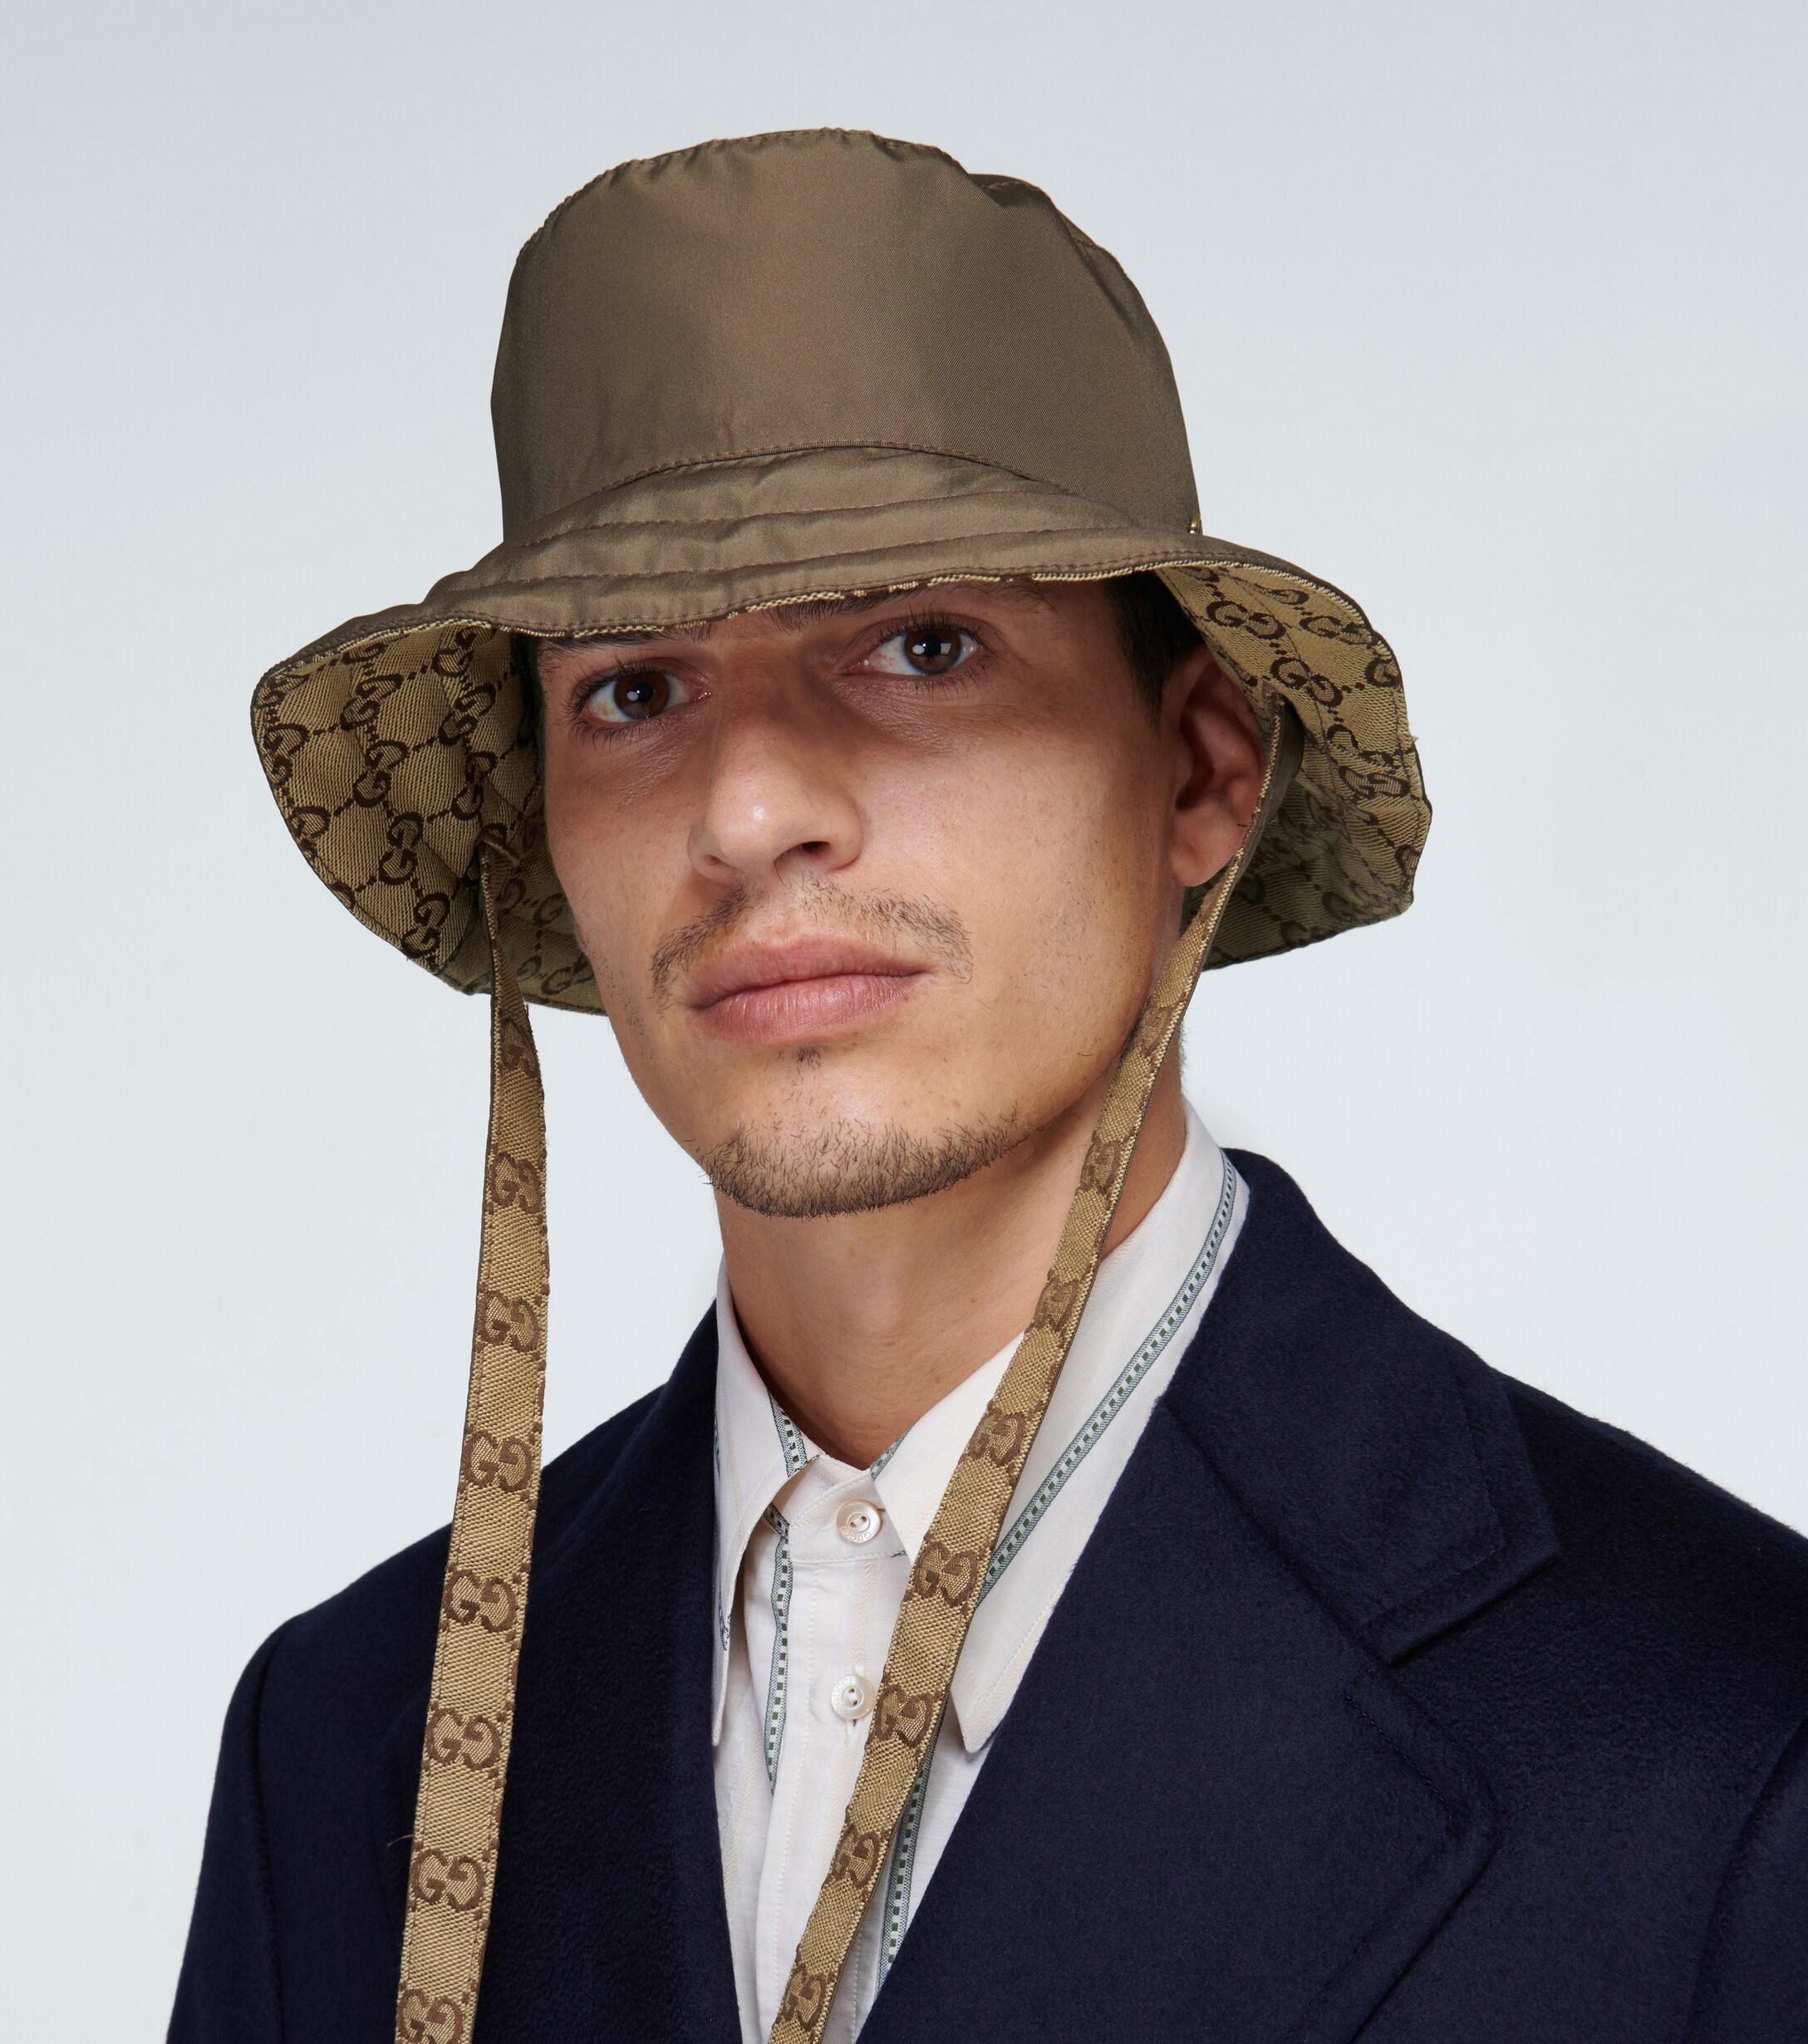 Gucci Canvas Reversible Bucket Hat in Brown for Men - Lyst